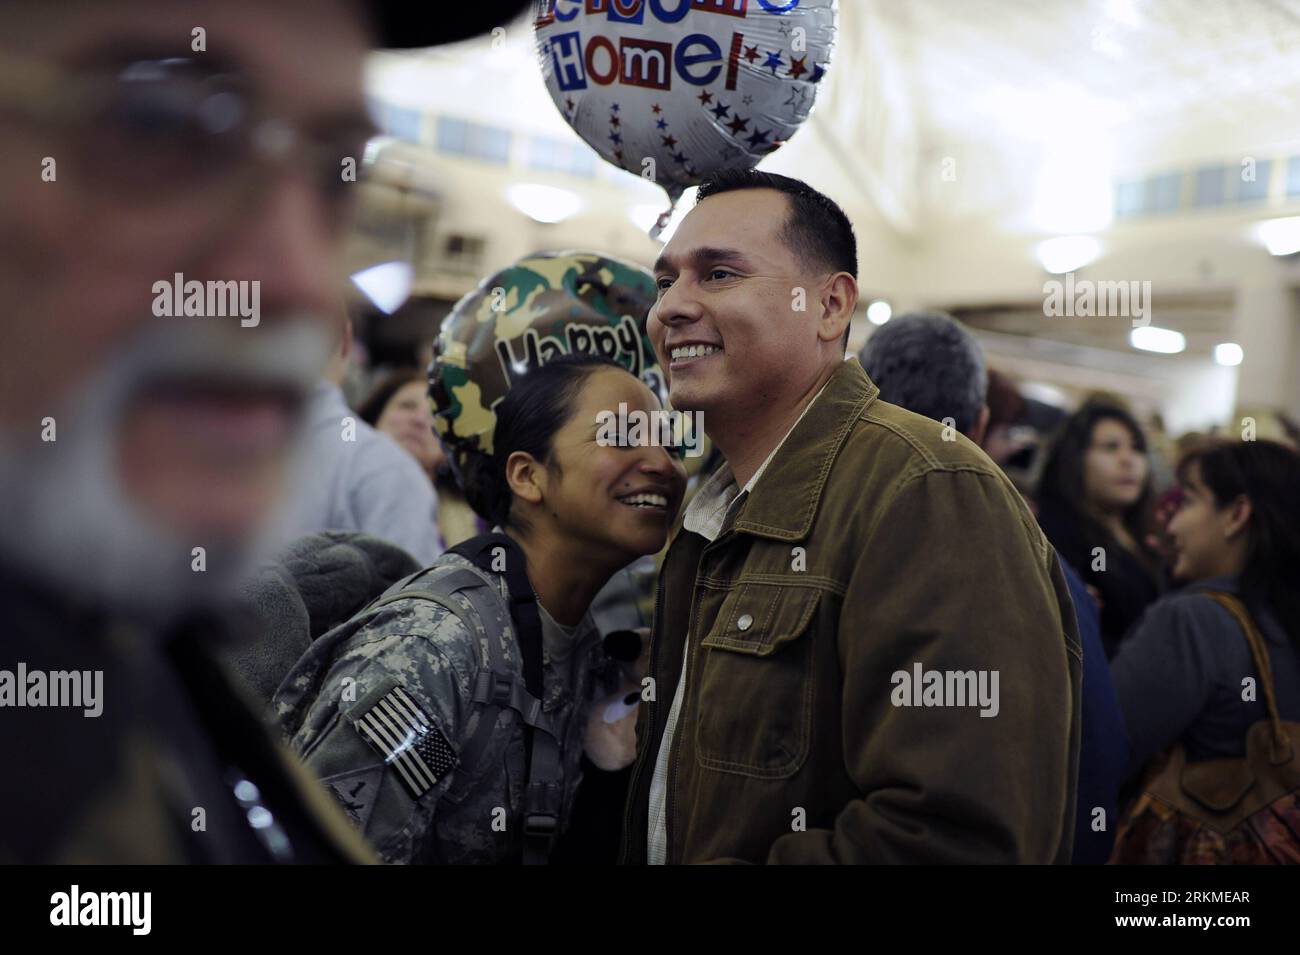 Bildnummer: 56693230  Datum: 12.12.2011  Copyright: imago/Xinhua (111213) -- EL PASO (TEXAS), Dec. 13, 2011 (Xinhua) -- A soldier from 4th Brigade, 1st Armored Division, US Army, meets with his family during a homecoming ceremony at Fort Bliss in El Paso of Texas, the United States, Dec. 12, 2011. Some 270 soldiers of 4th Brigade returned from Iraq and reunited with their family on Monday. The U.S. is to pull out nearly all its troops from Iraq by Dec. 31 under a 2008 security pact with the Iraqi government. (Xinhua/Zhang Jun)(zcc) U.S.-EL PASO-SOLDIERS-HOME PUBLICATIONxNOTxINxCHN Gesellschaft Stock Photo